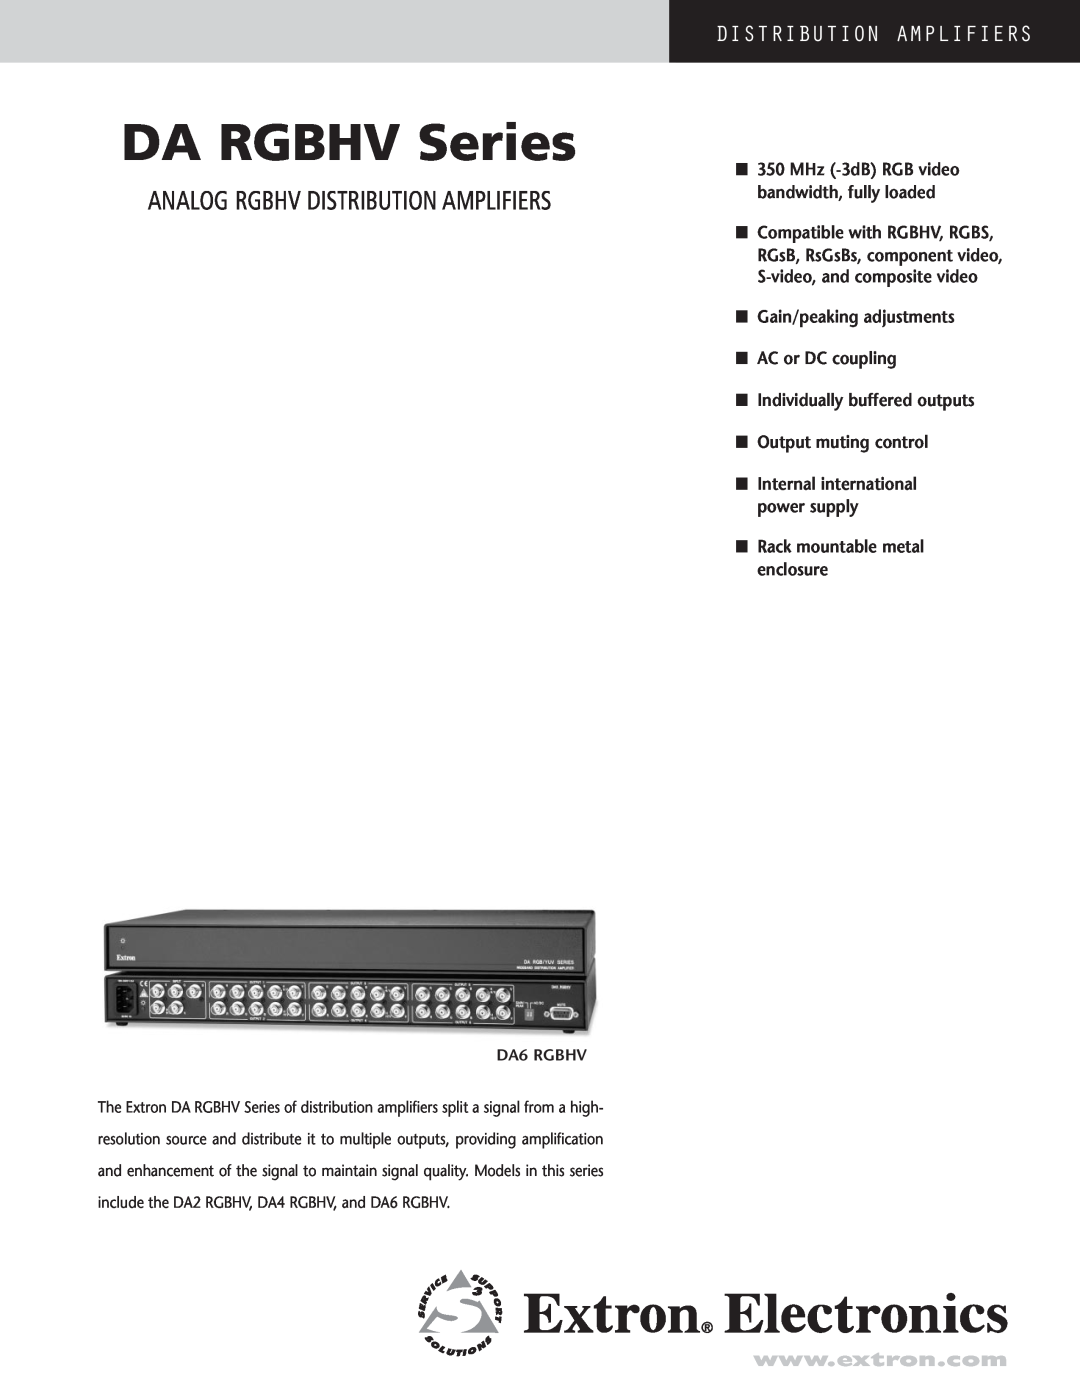 Extron electronic manual DA RGBHV Series, Analog Rgbhv Distribution Amplifiers, Individually buffered outputs 